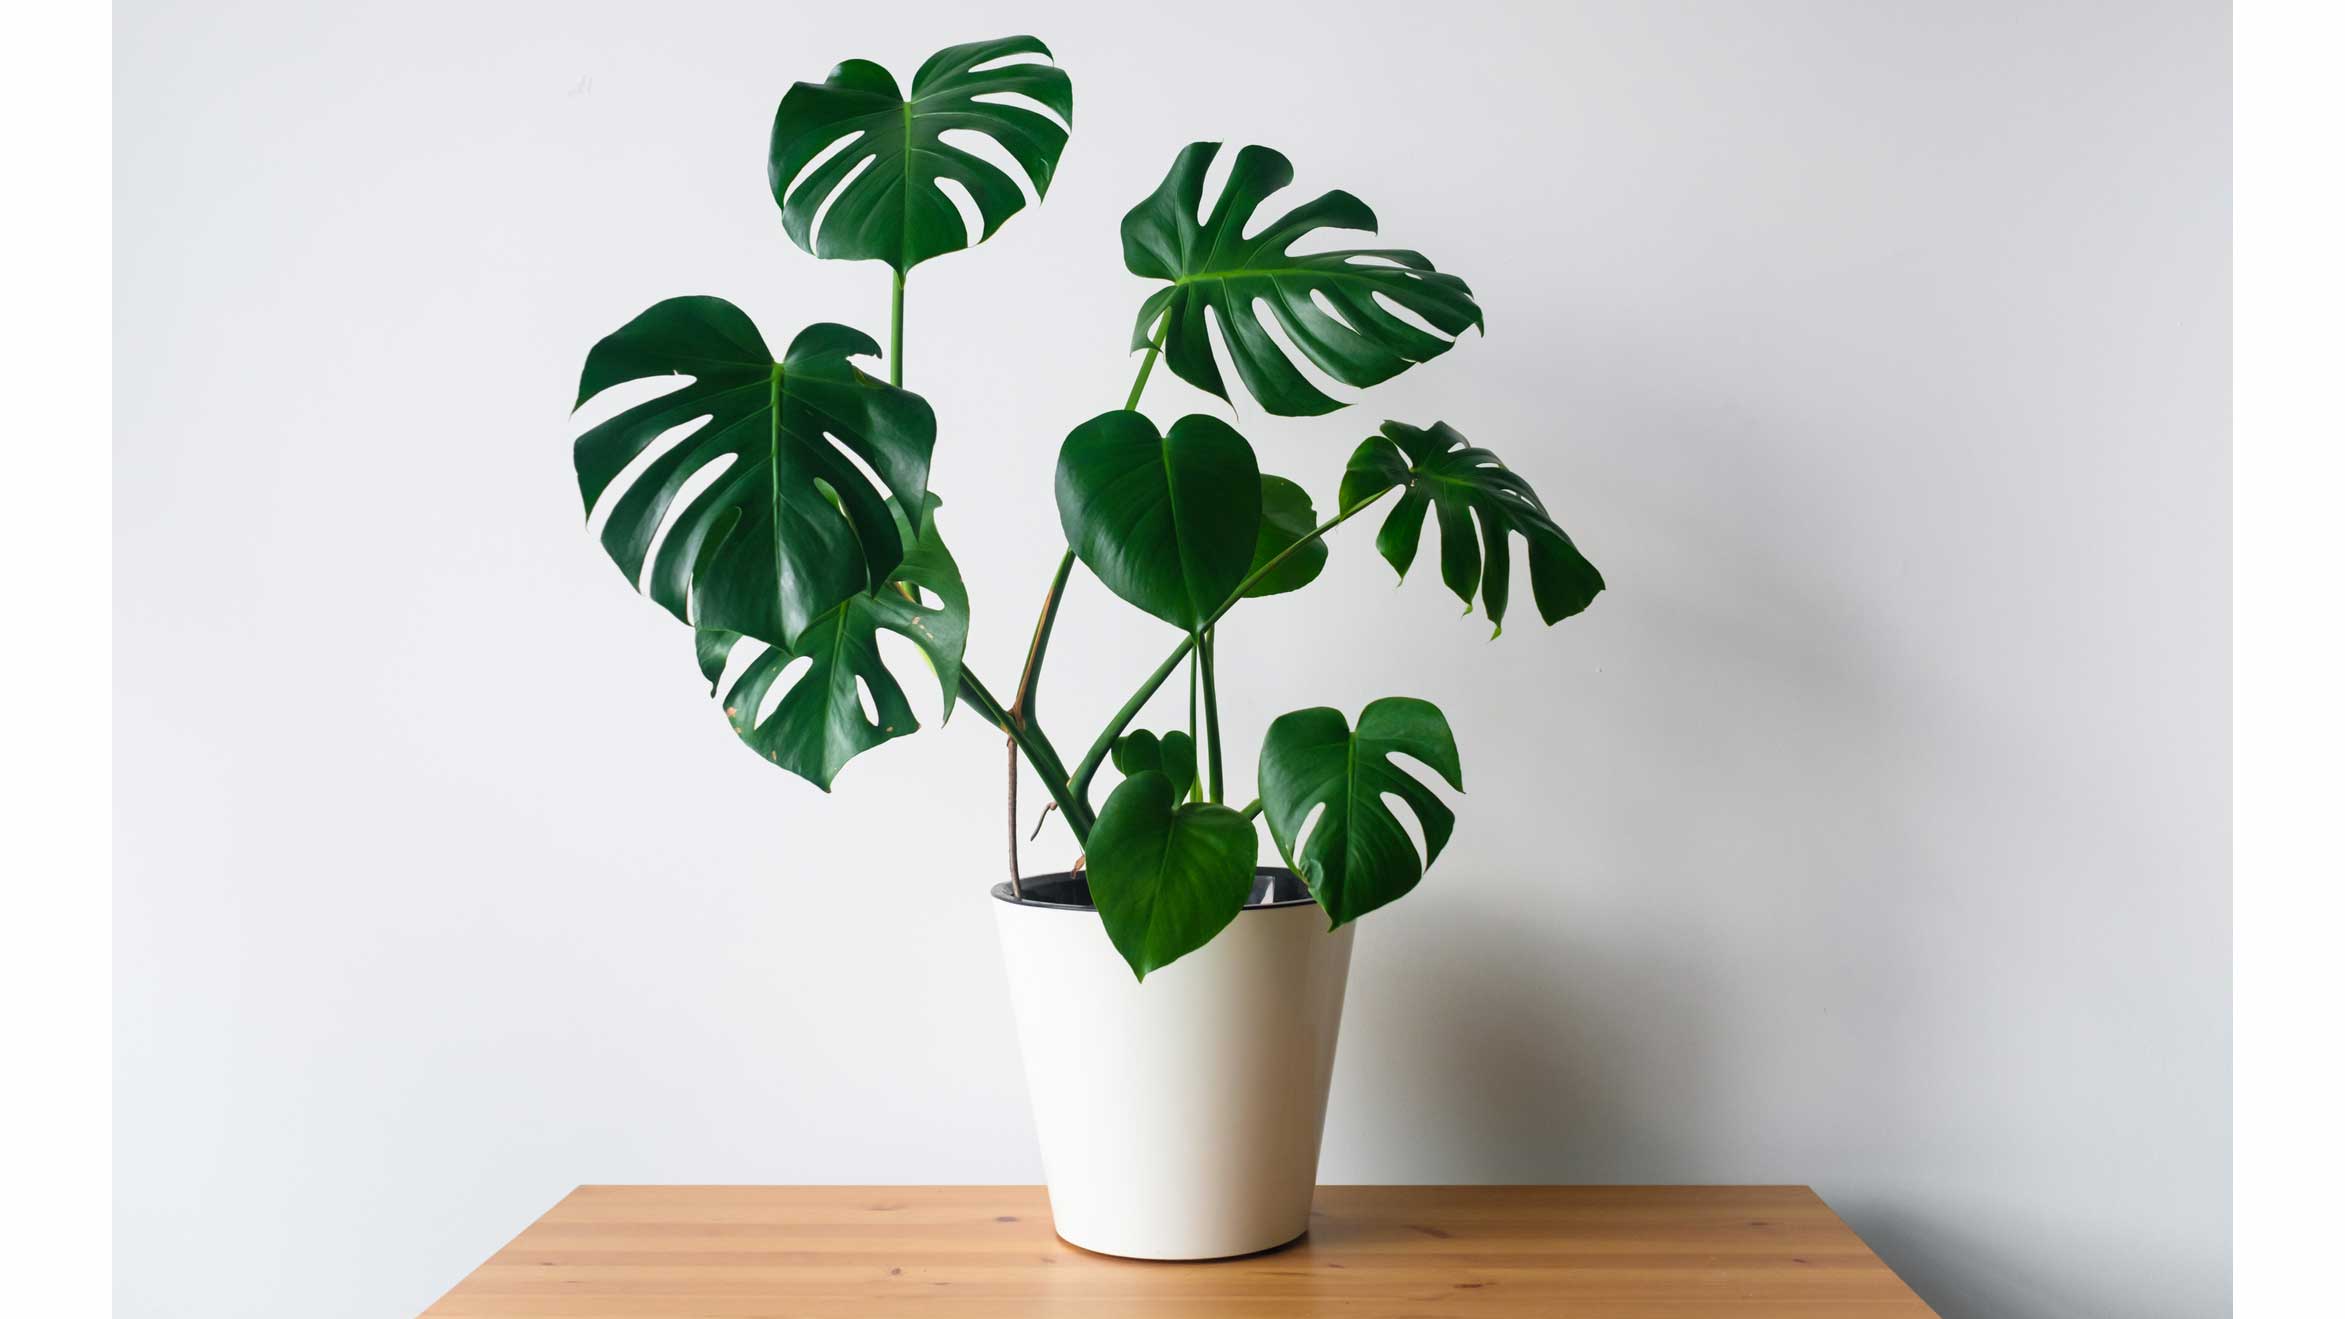 A monstera deliciosa planted in a white pot, sitting on a timber table in front of a white wall.